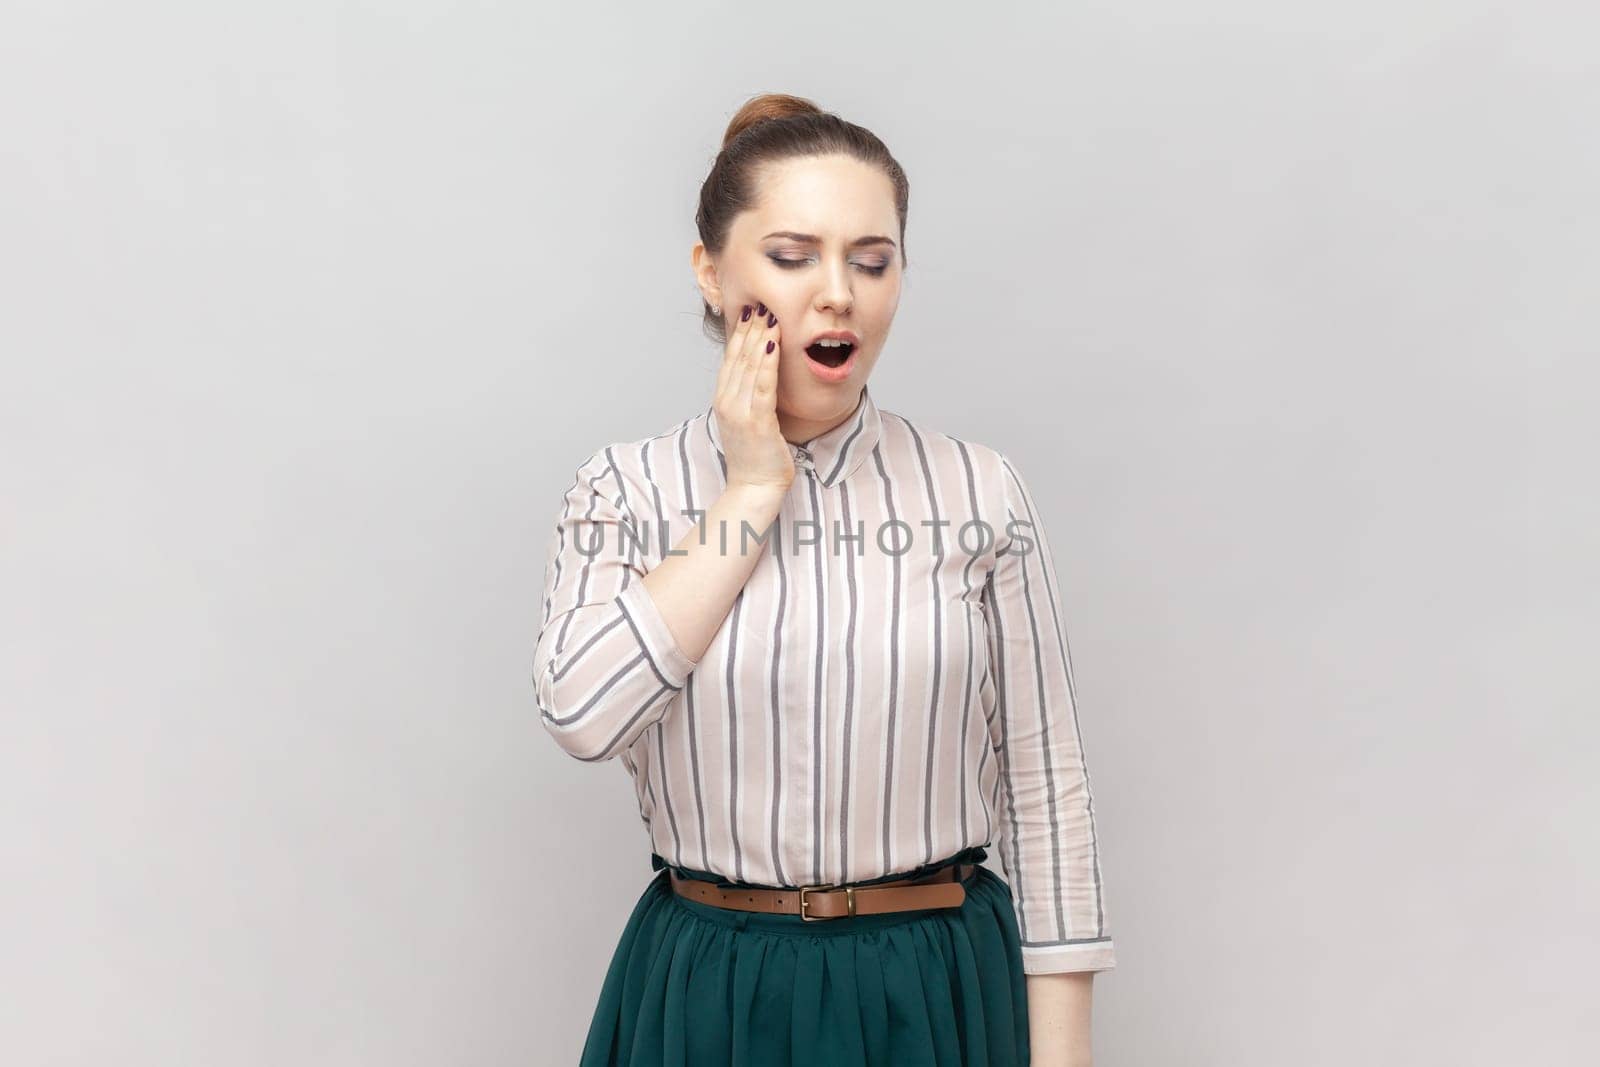 Portrait of sick unhealthy ill woman wearing striped shirt and green skirt standing touching her painful cheek, suffering terrible toothache. Indoor studio shot isolated on gray background.